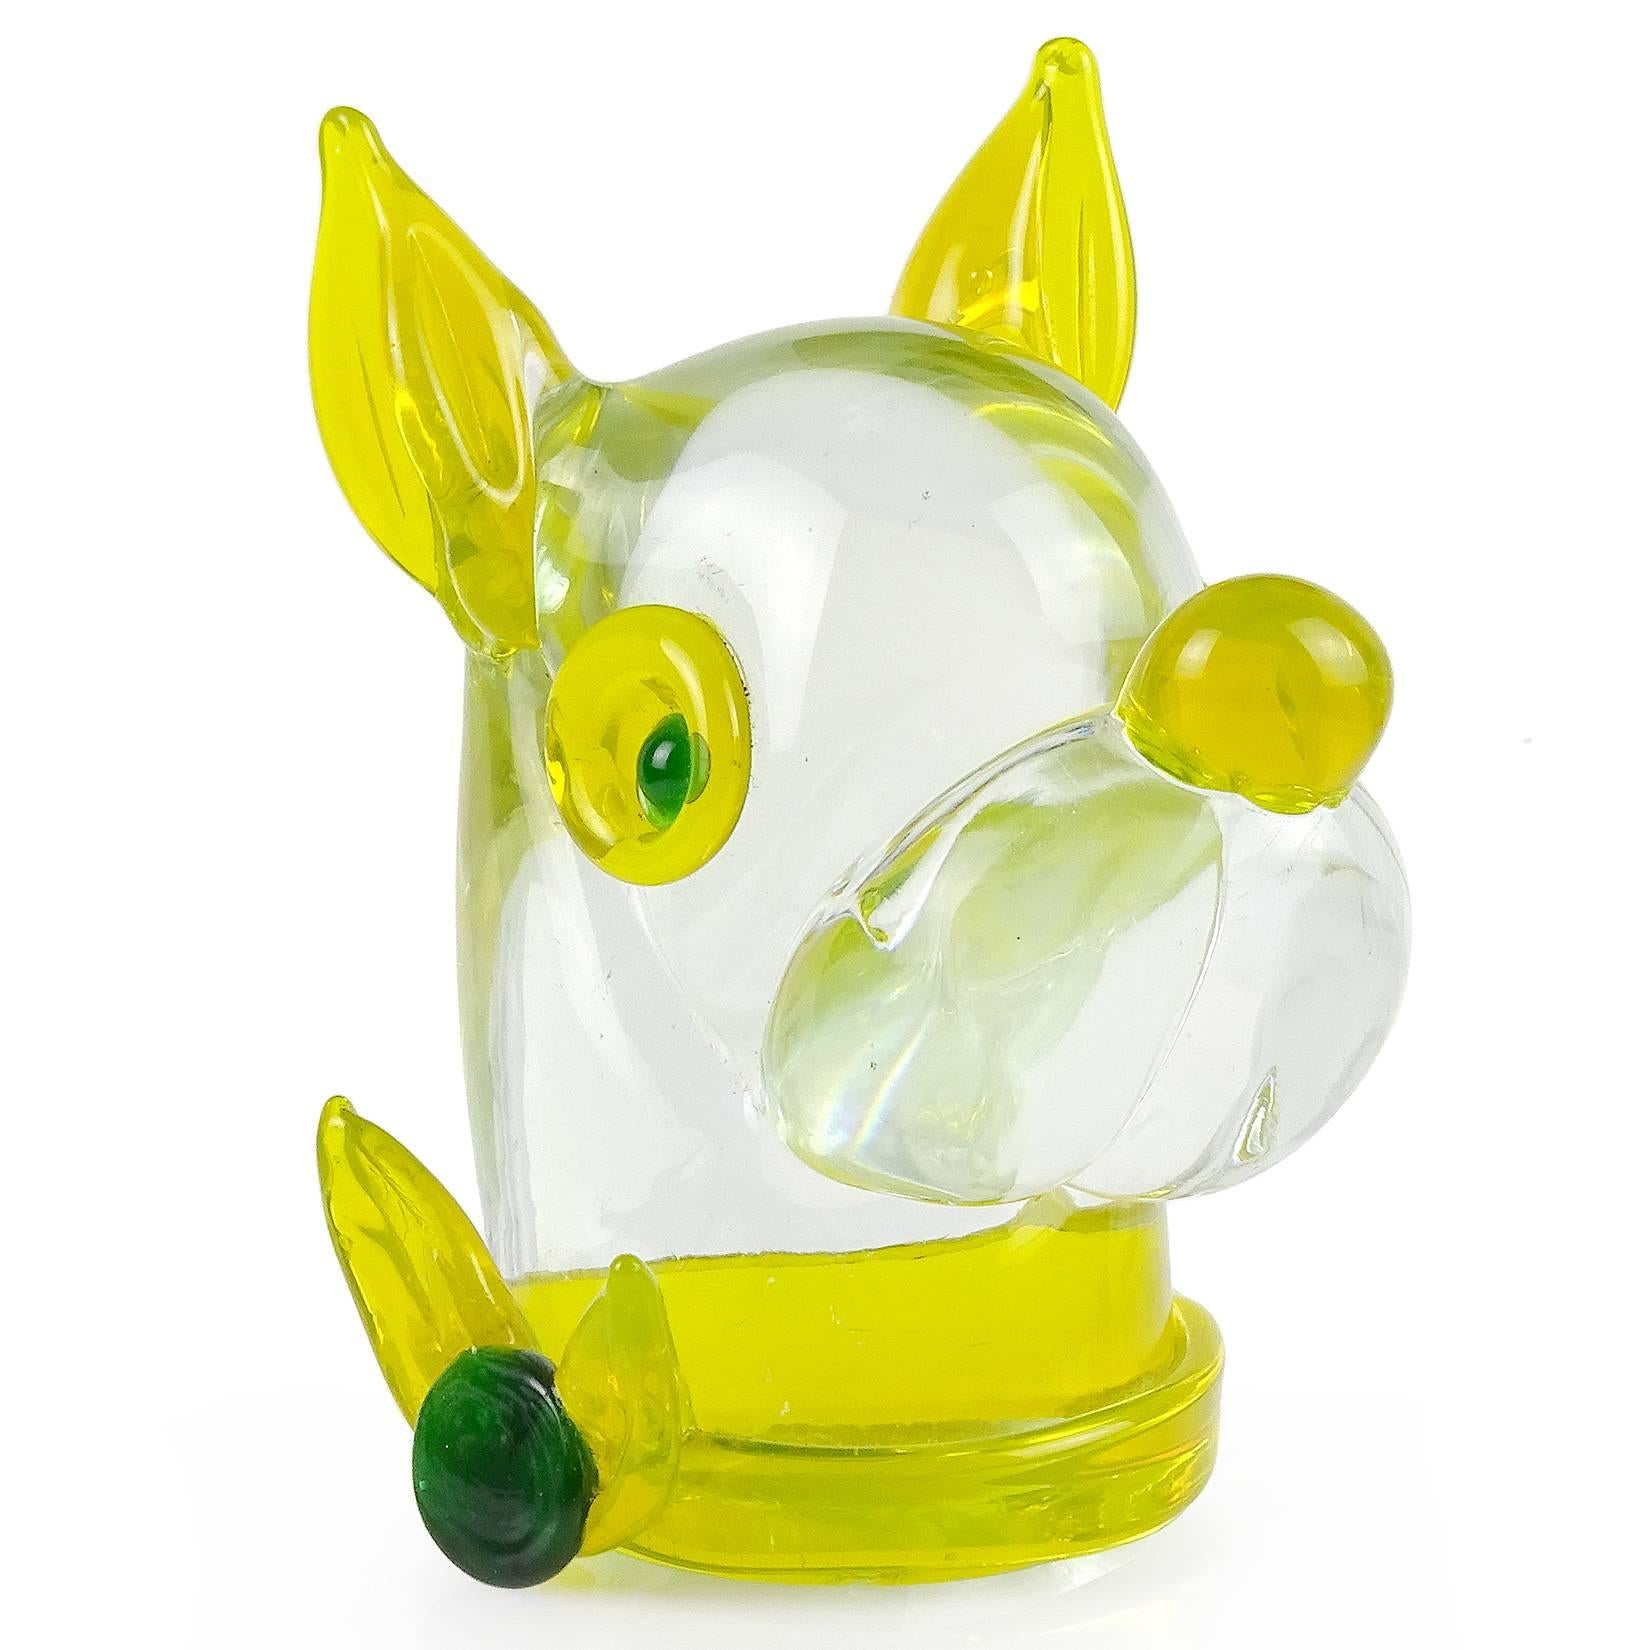 Cute vintage Murano hand blown clear Italian art glass puppy dog head sculpture / paperweight. Documented to the Fratelli Toso Company. The dog has a tied handkerchief around its neck, with yellow and green accents. Original Murano label still